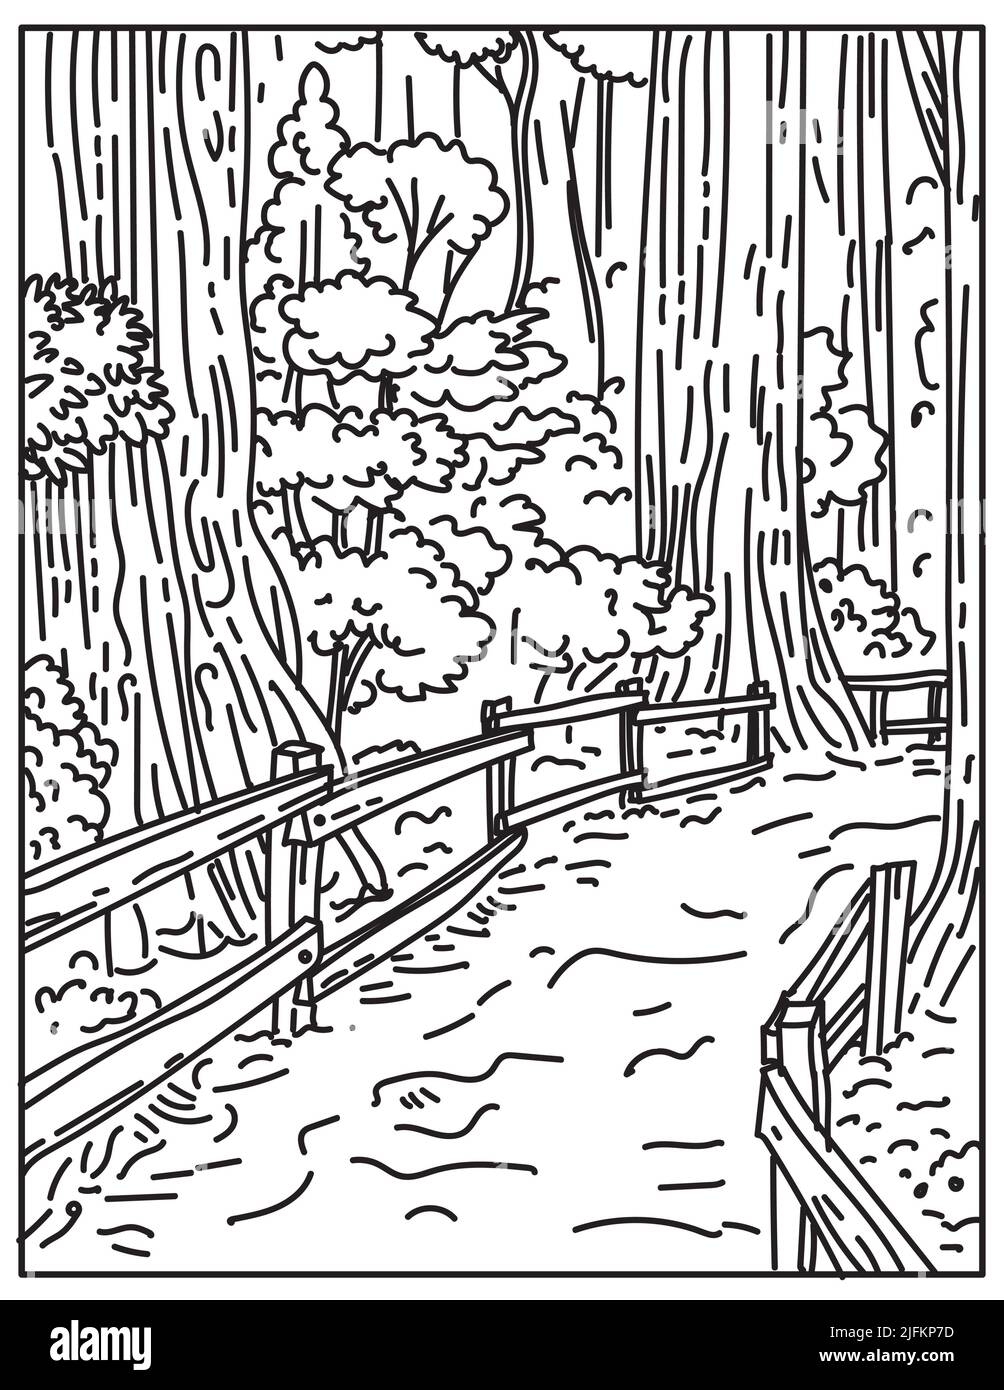 Mono line illustration of towering old-growth redwoods in Muir Woods National Monument part of Golden Gate National Recreation Area, California done Stock Photo